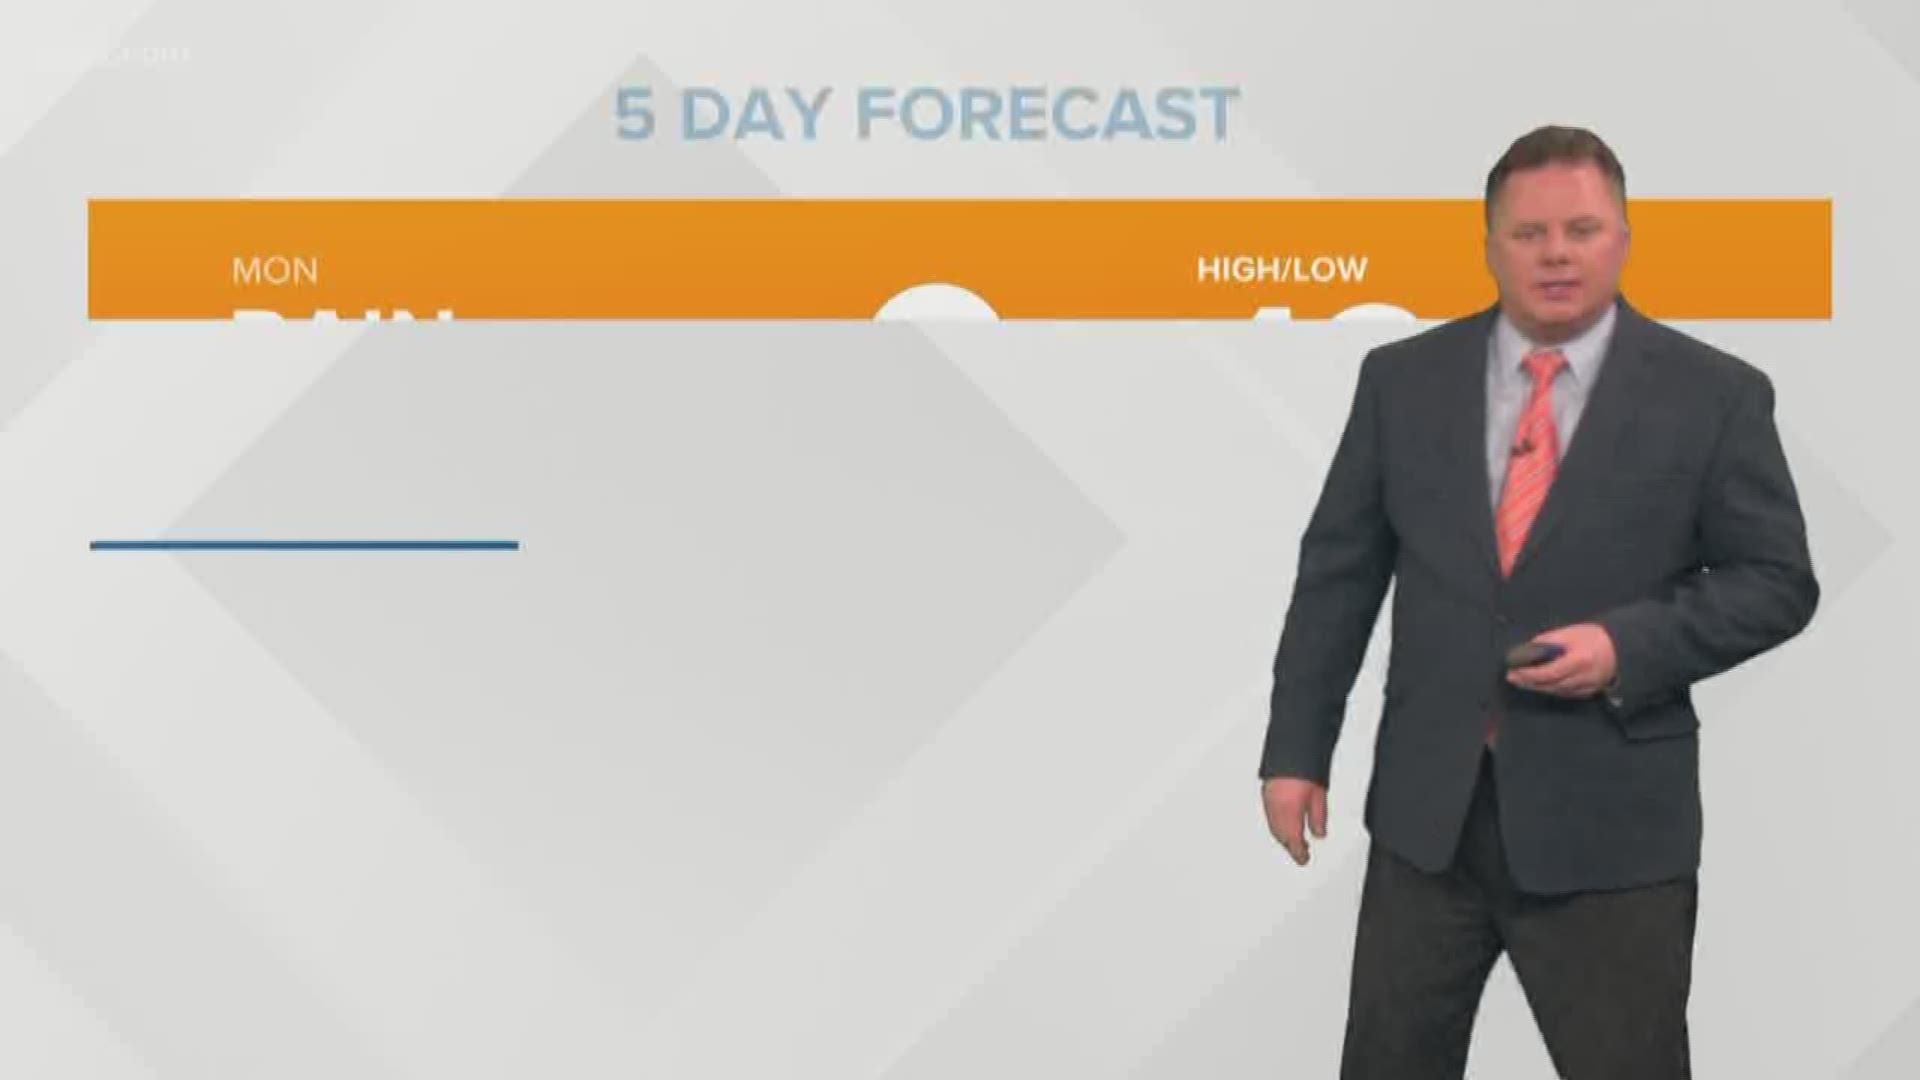 Patrick gives us the Daybreak forecast for 4/16/18